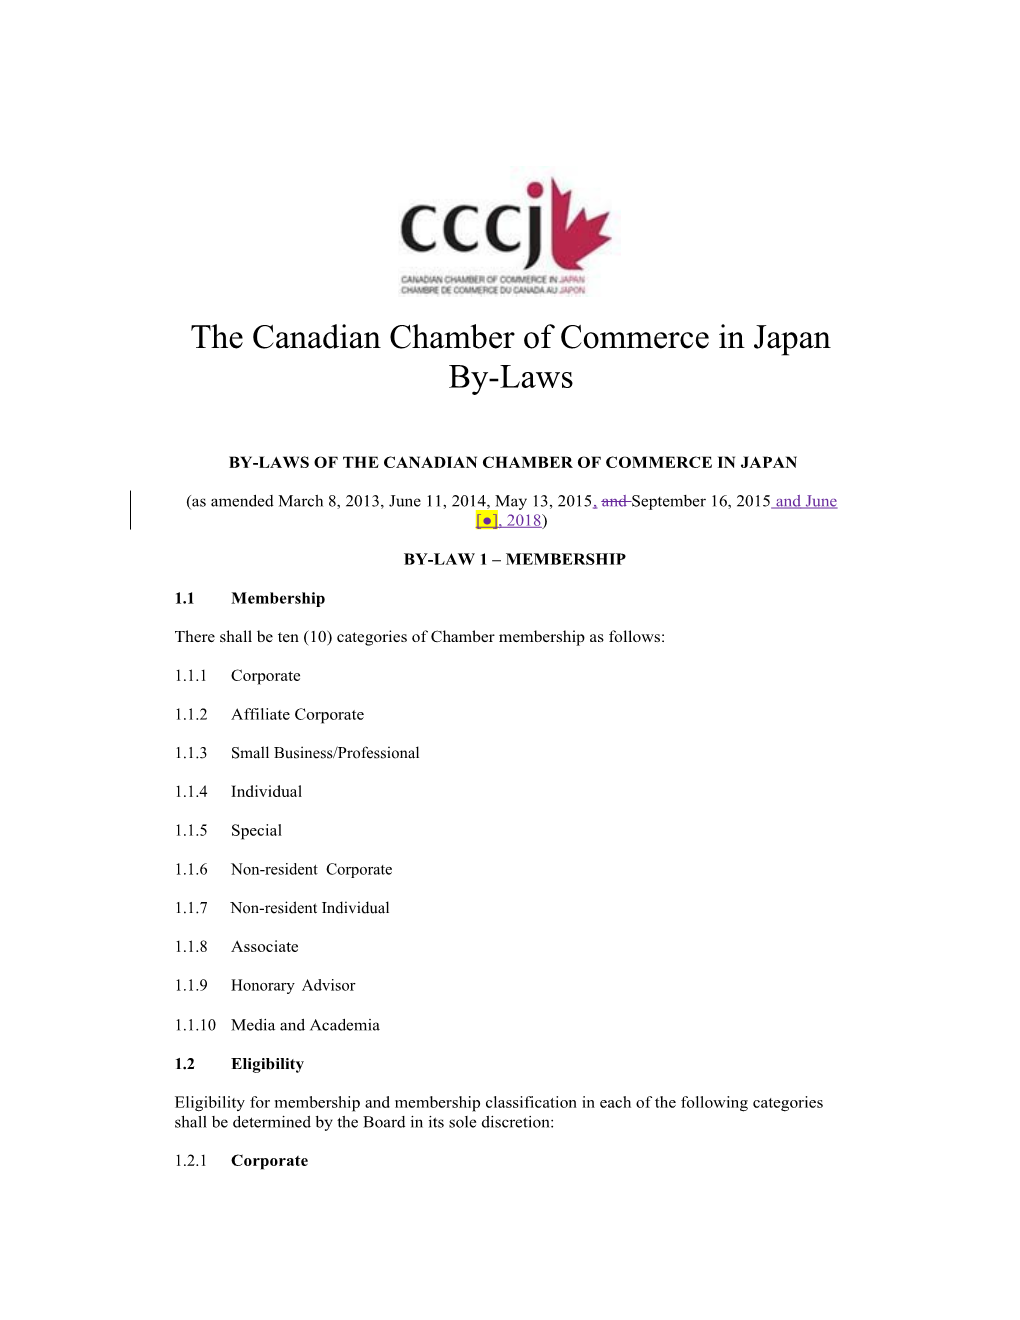 CCCJ By-Laws (As Amended) - Version Uploaded on September 17, 2015